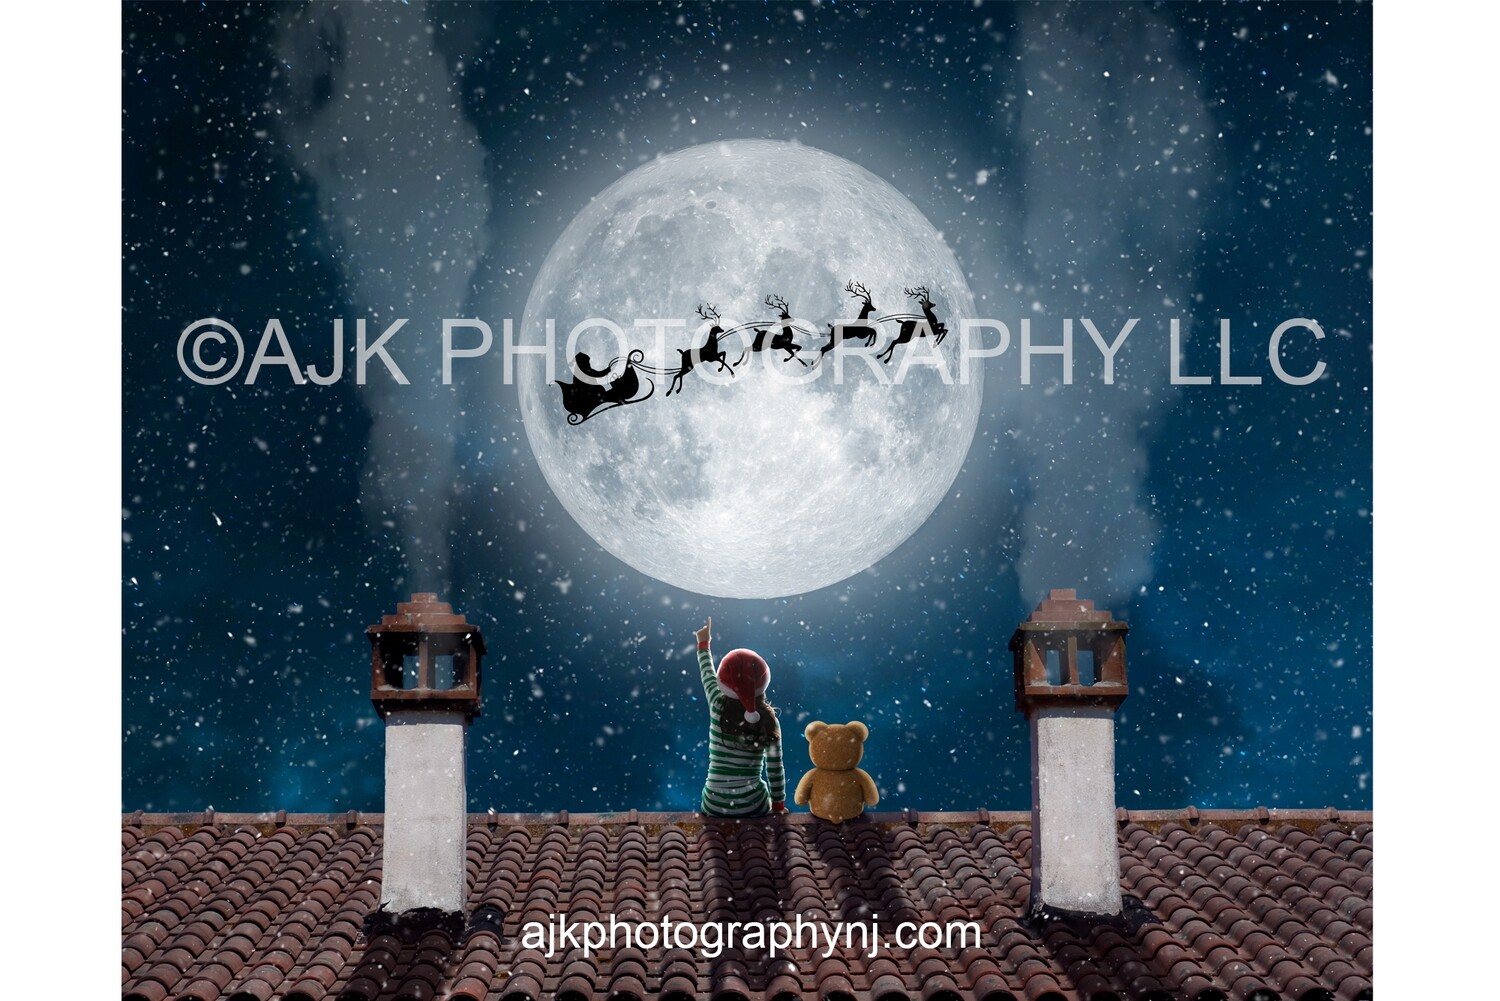 Santa in moon teddy bear on roof Digital Background, Christmas Digital Backdrop by Eric Miele from AJK Photography